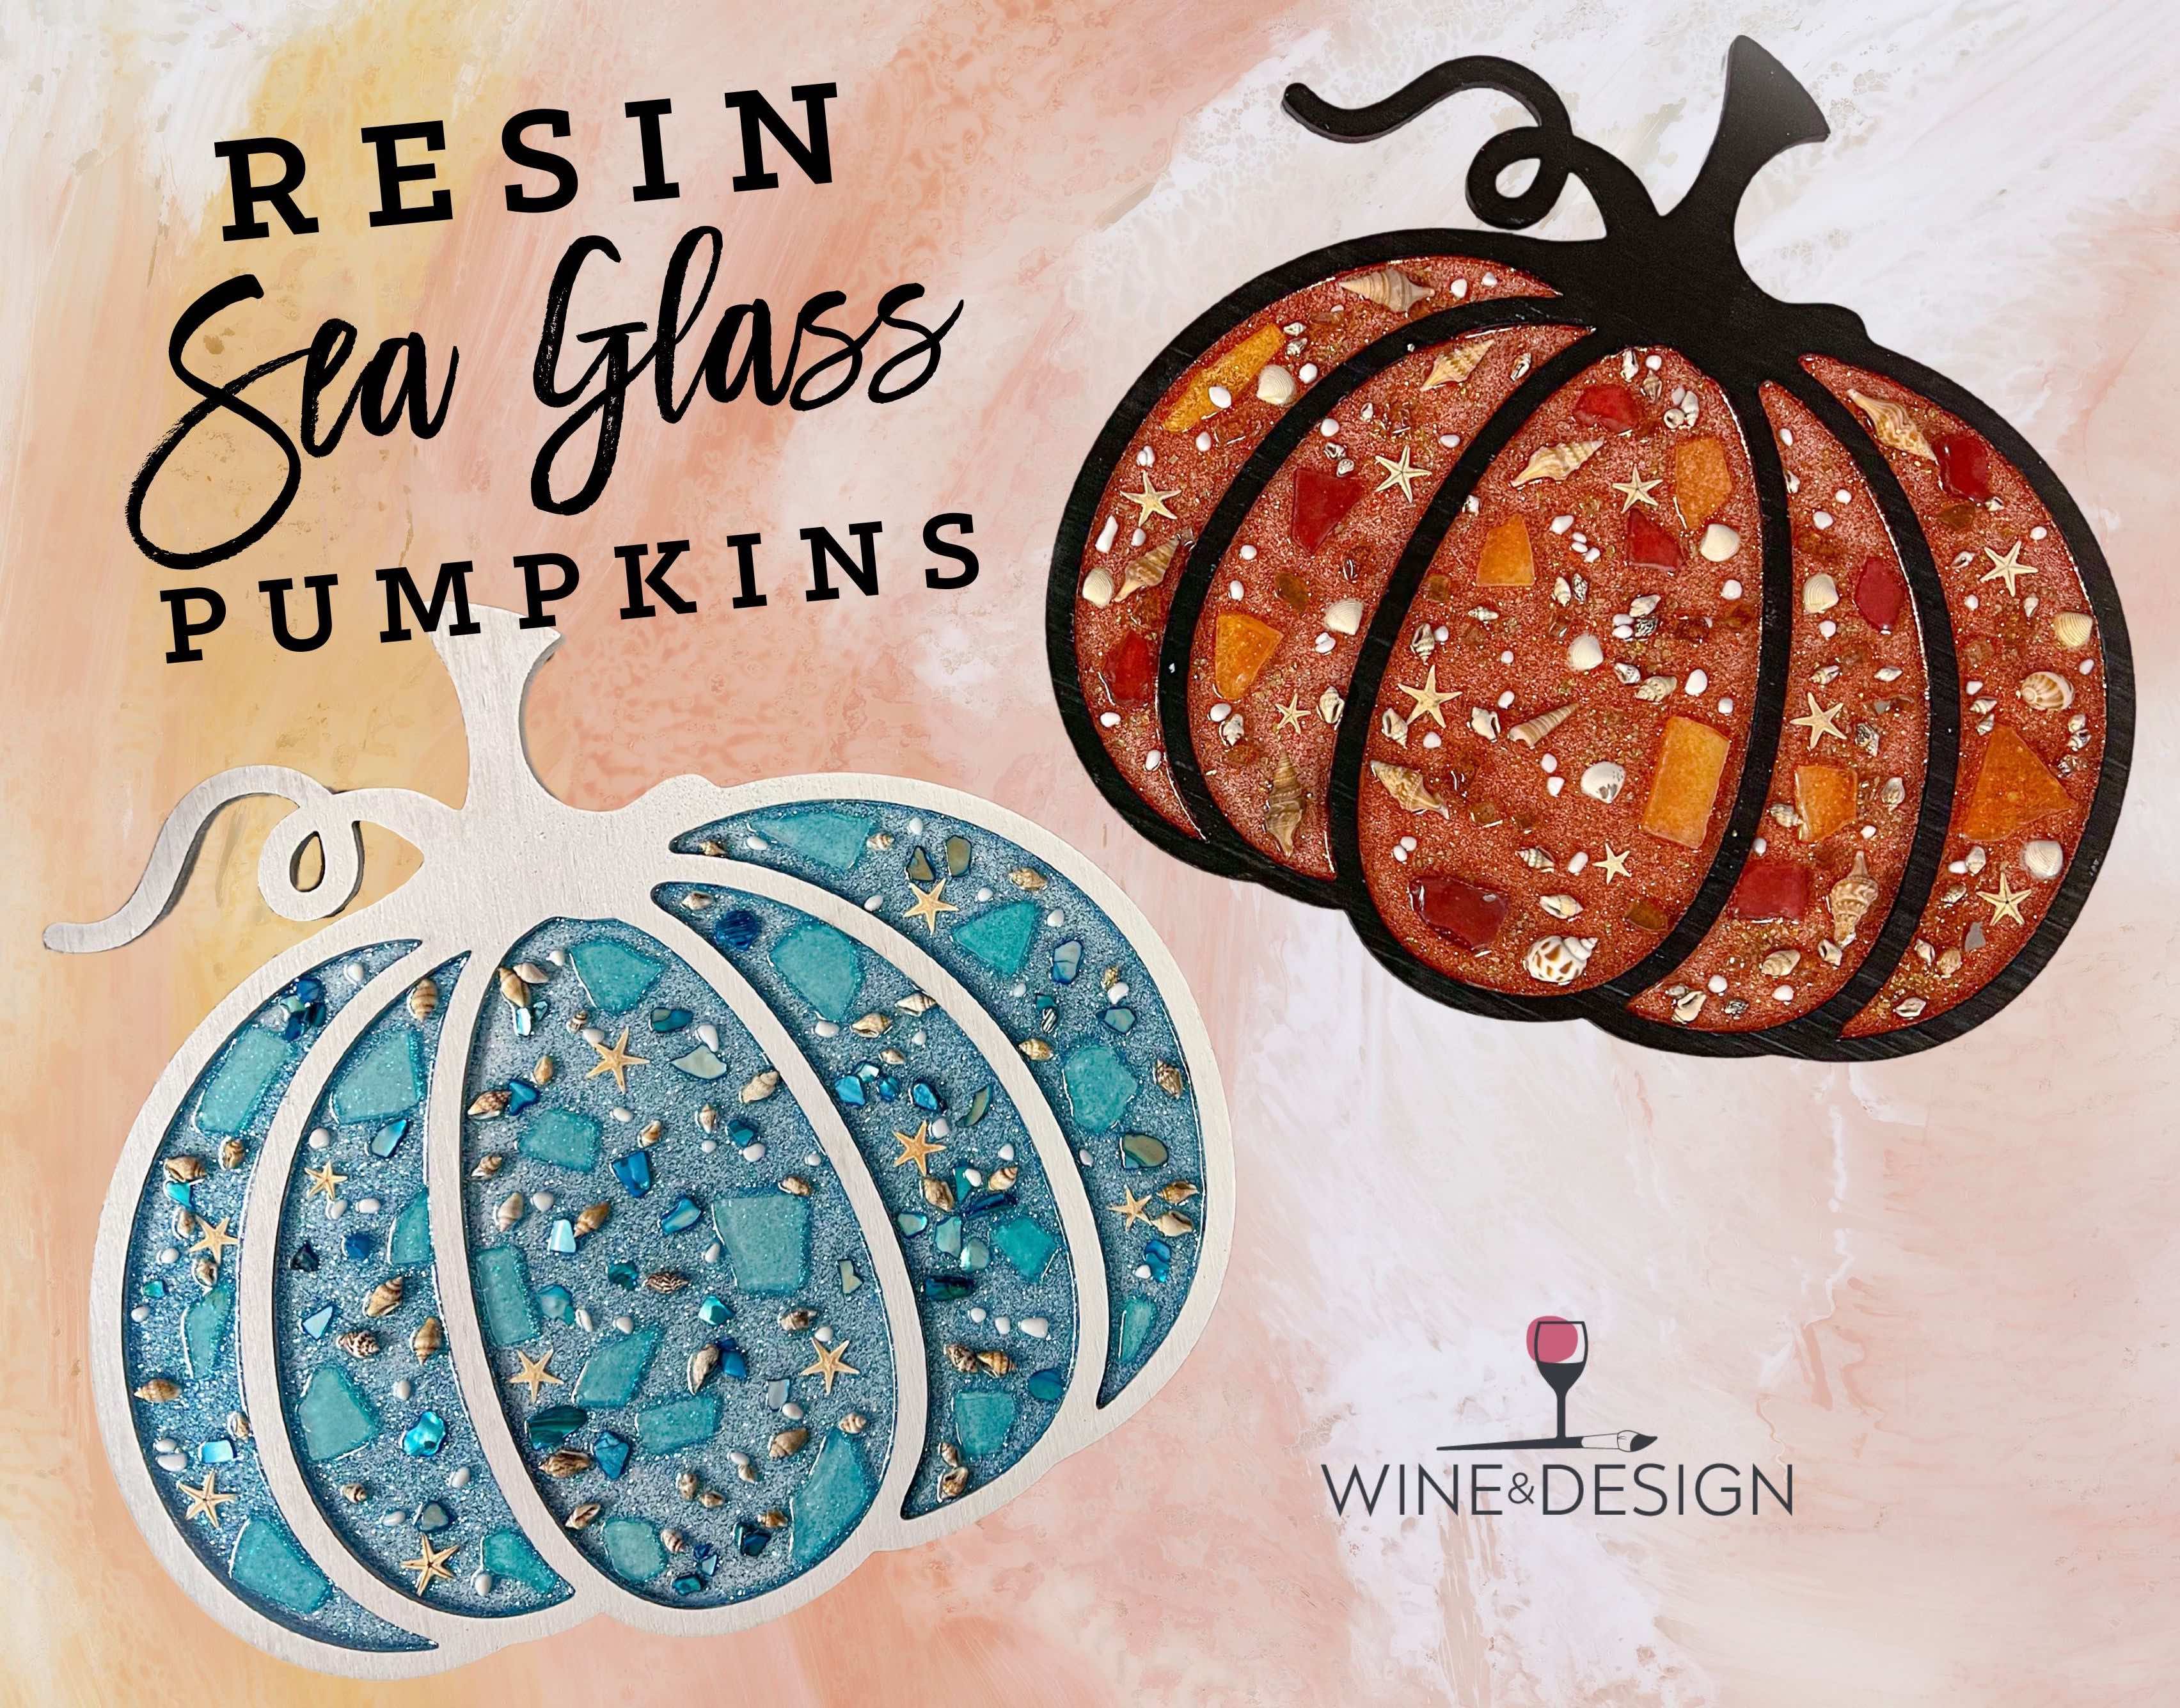 SOLD OUT! Resin Sea Glass Pumpkin